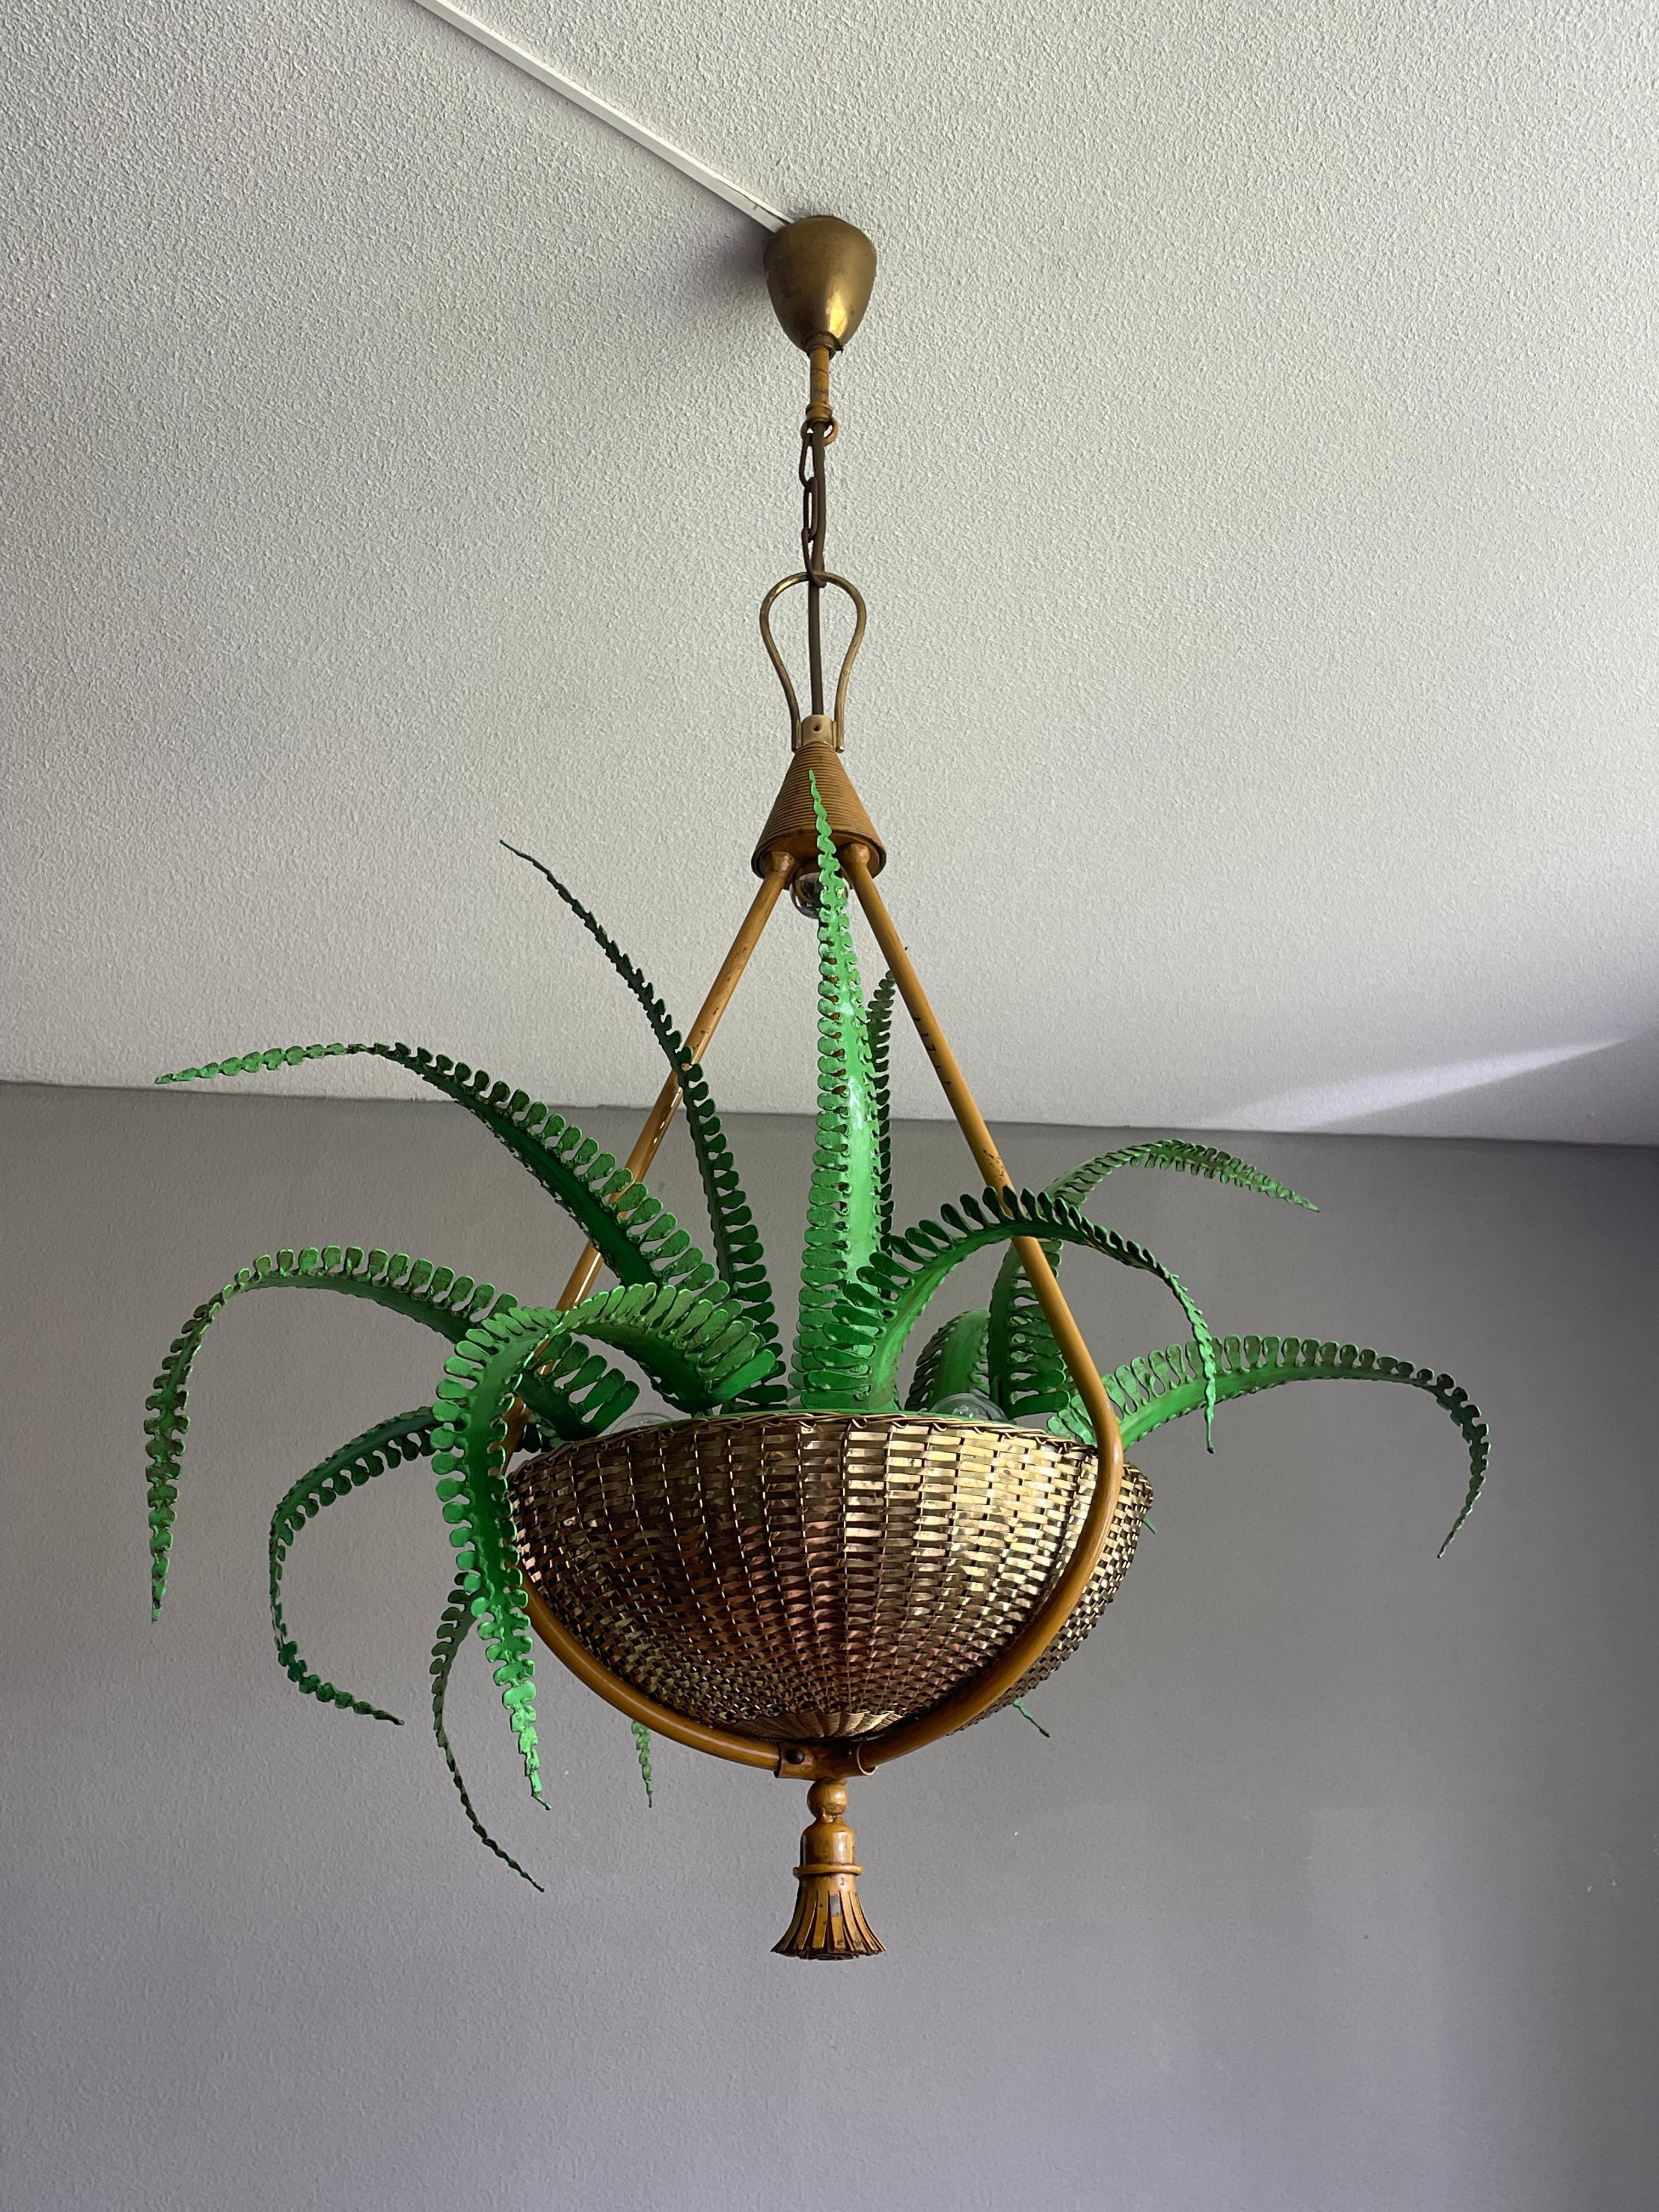 20th Century Very Rare Hollywood Regency Fern Chandelier Attr. To Maison Bagues, France 1950s